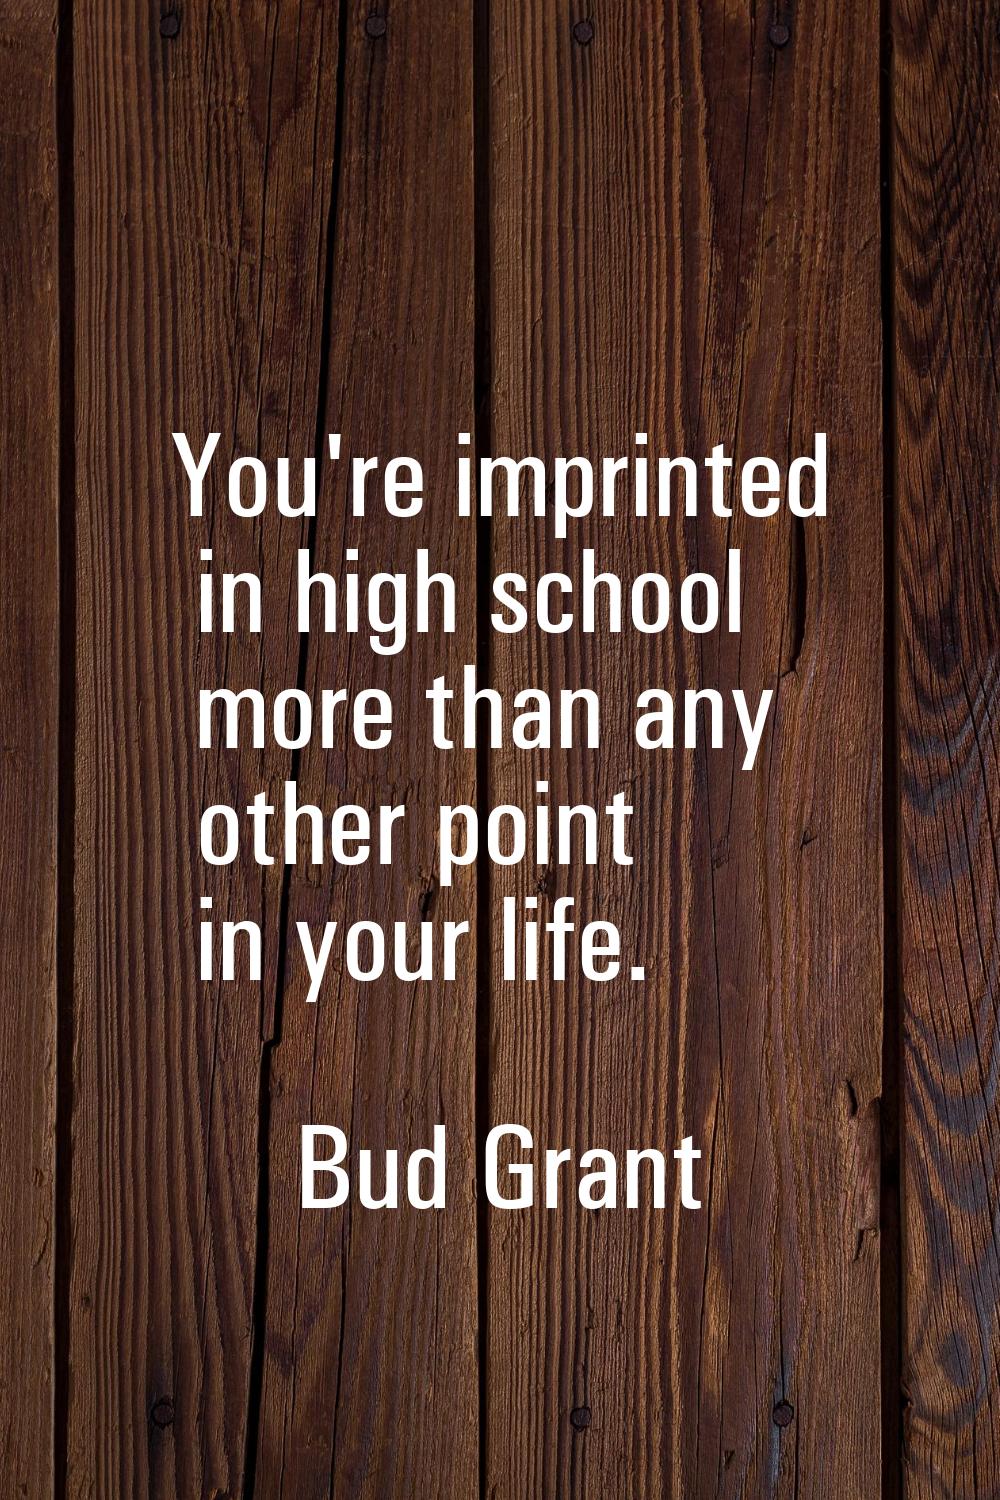 You're imprinted in high school more than any other point in your life.